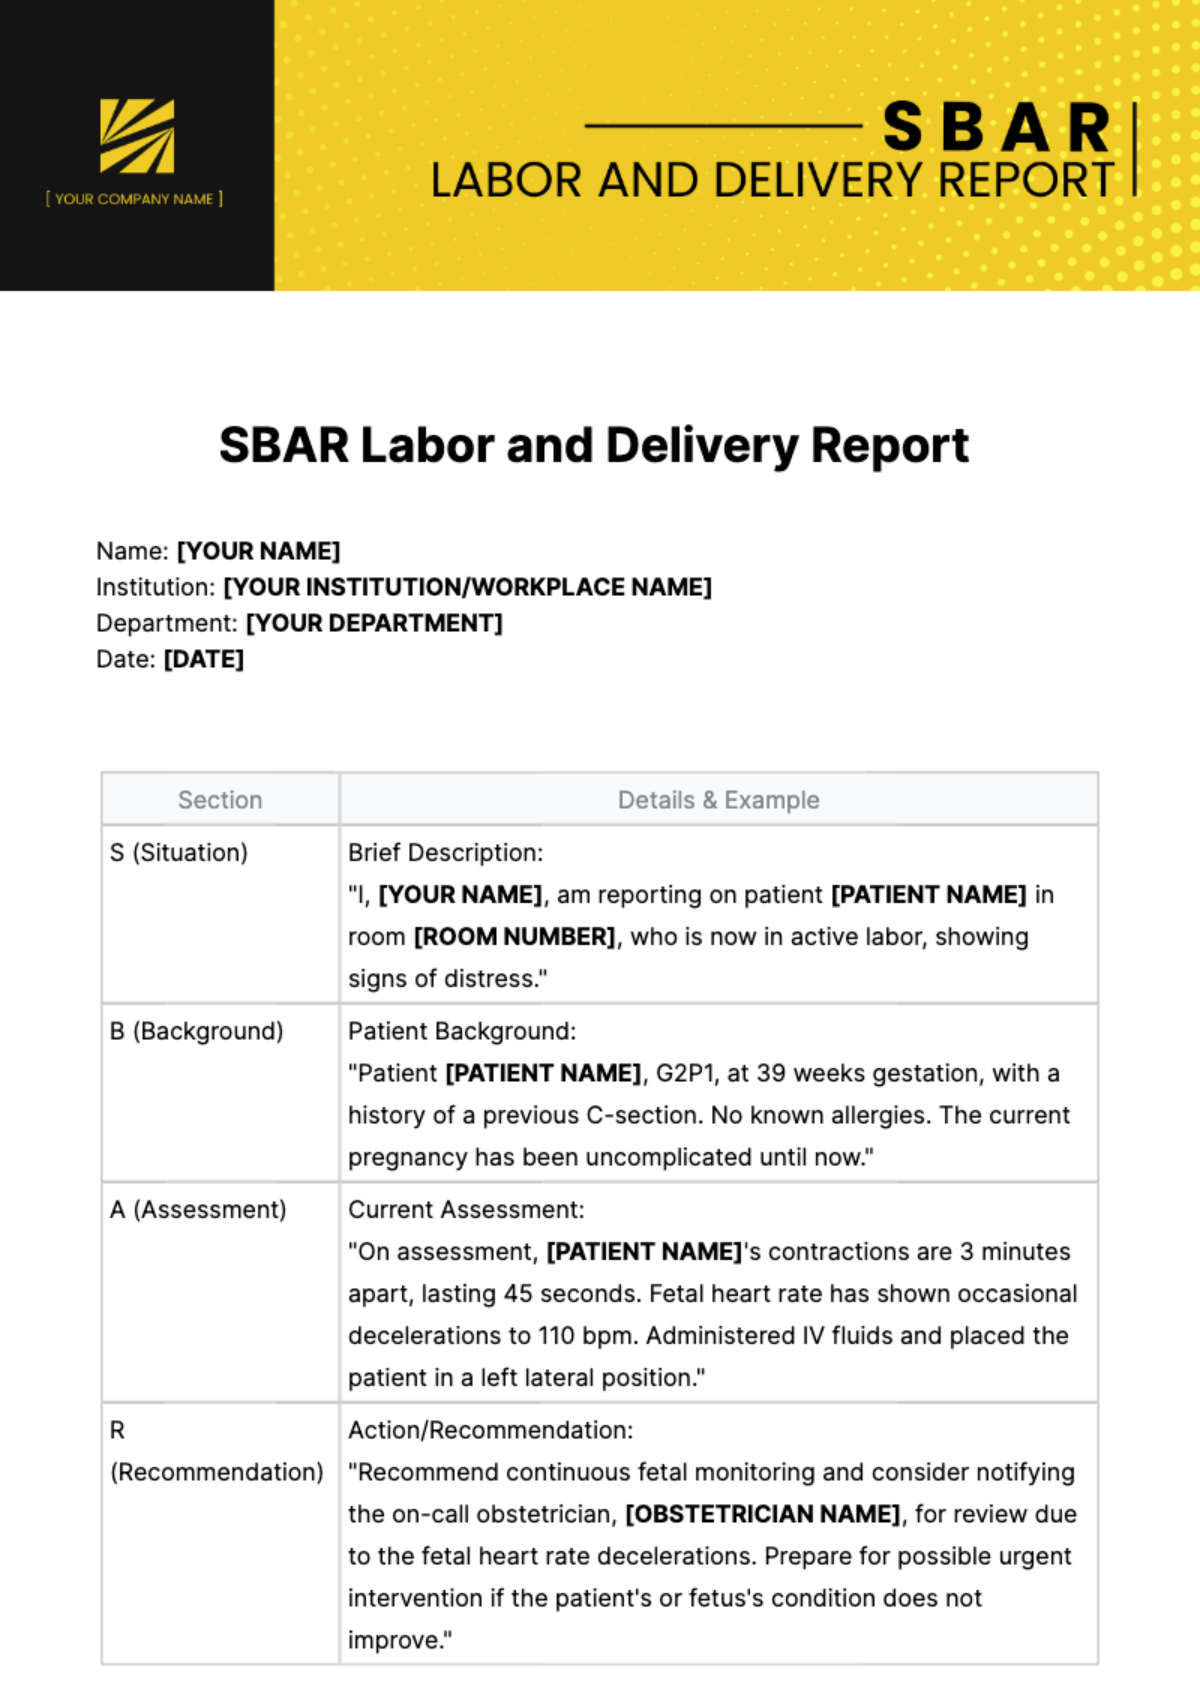 SBAR Labor Delivery Report Template